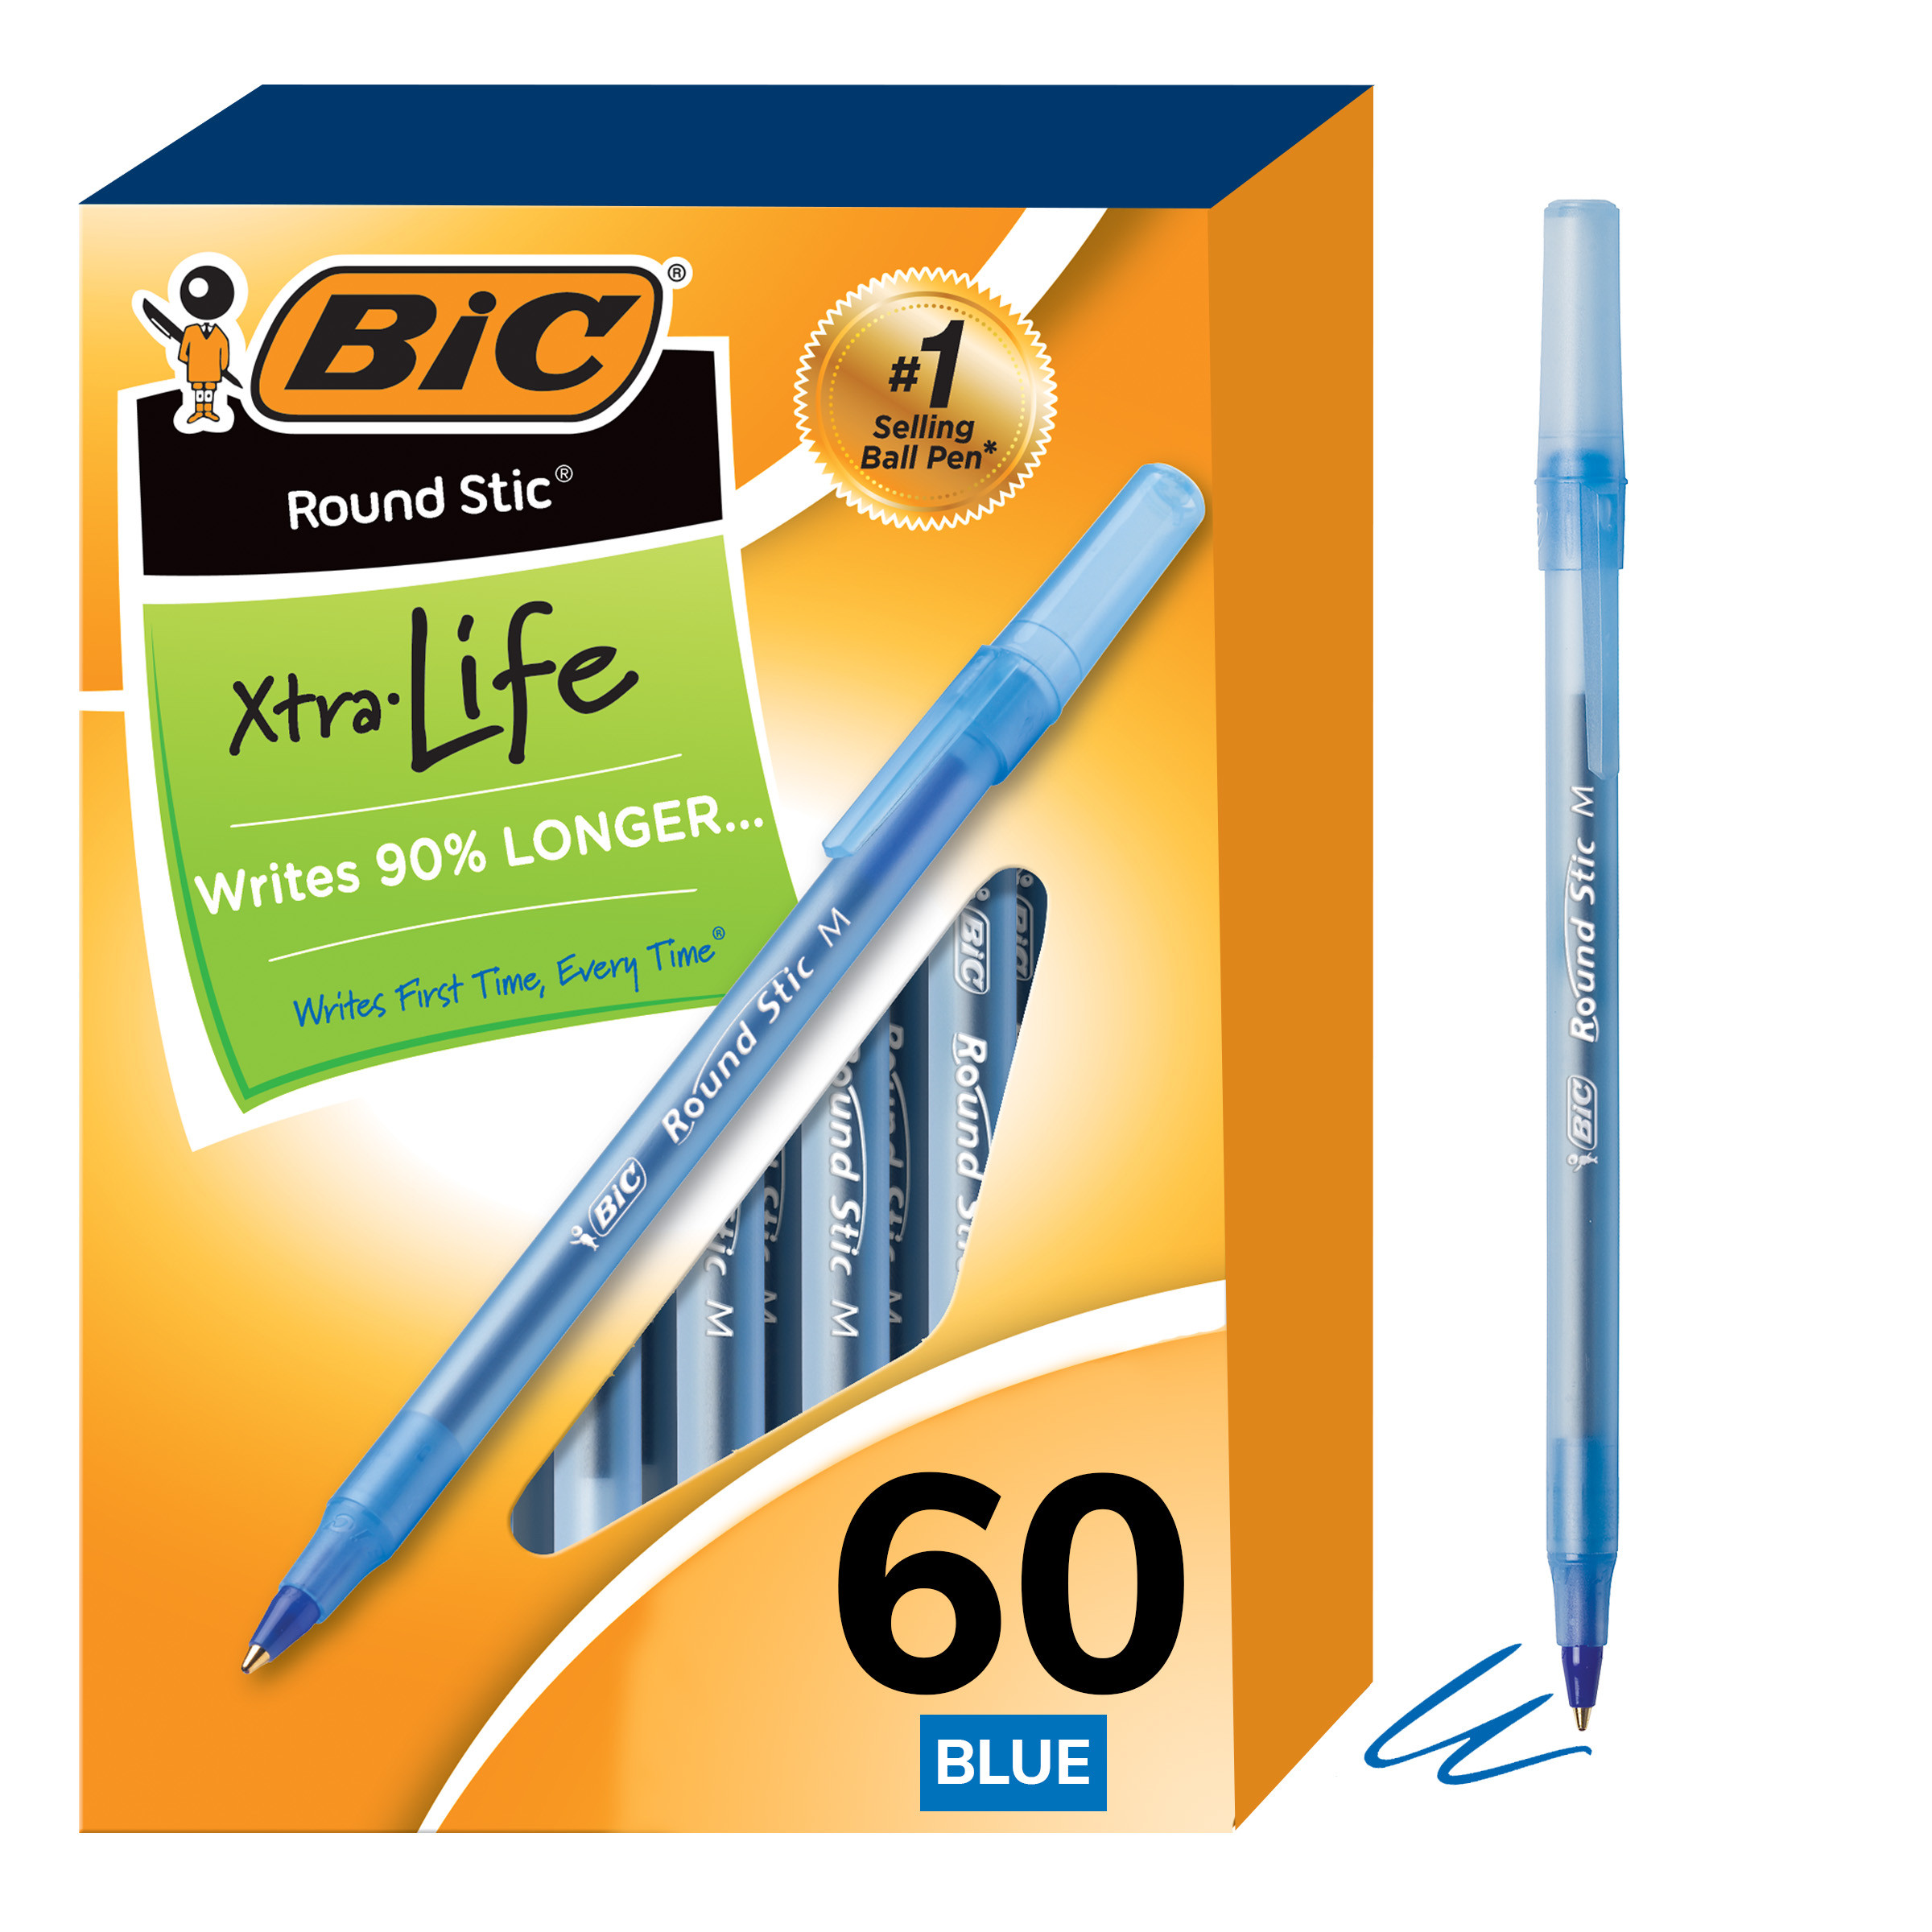 BIC Round Stic Xtra Life Ballpoint Pens, Medium Point (1.0mm), Blue, 60 Count - image 1 of 9